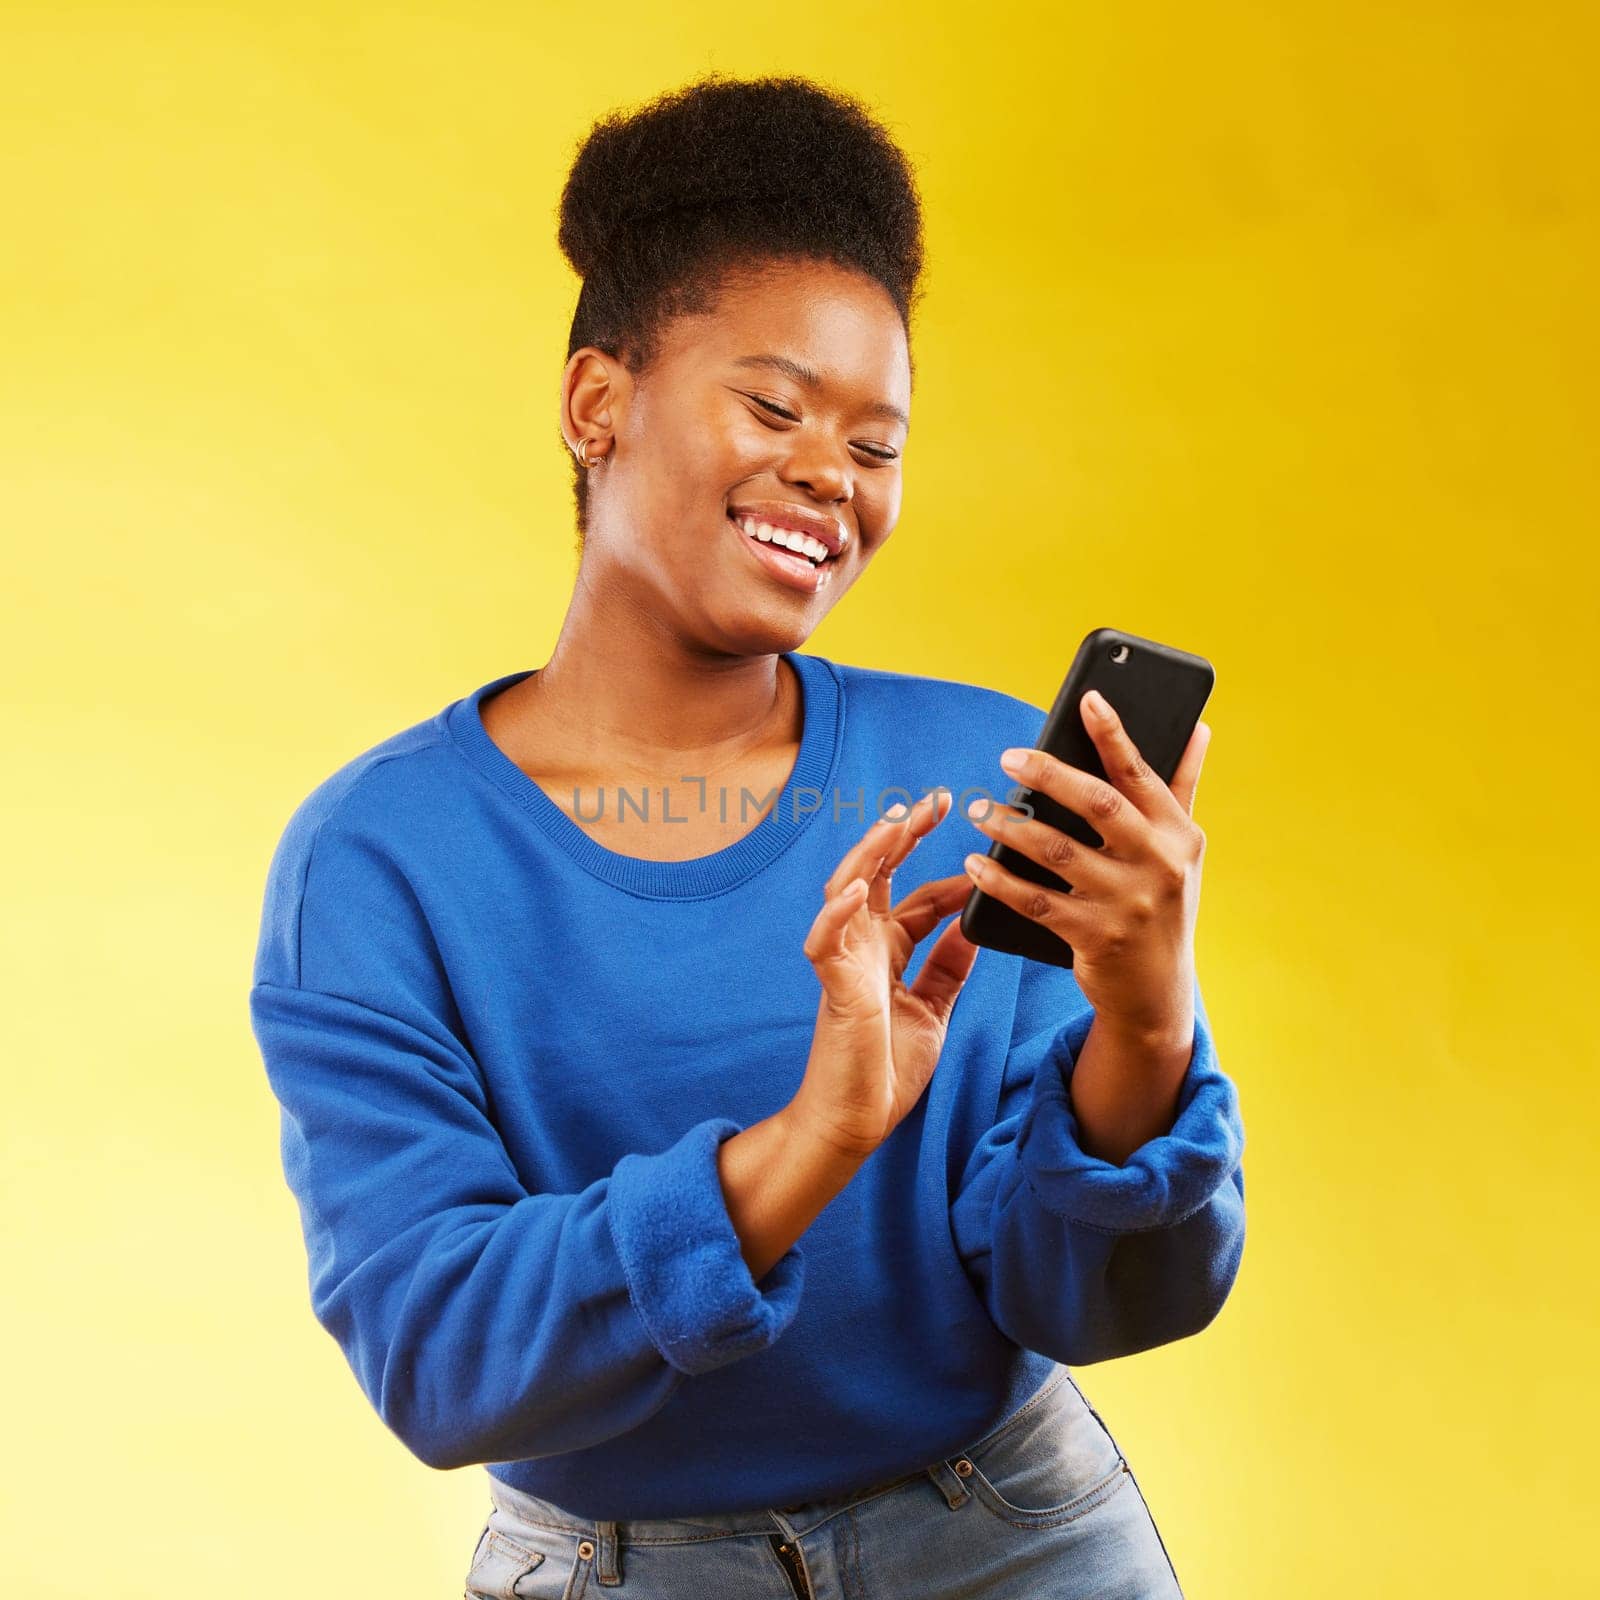 Happy black woman, phone and social media for networking or communication against a yellow studio background. African female person smile for online browsing or chatting on mobile smartphone app.